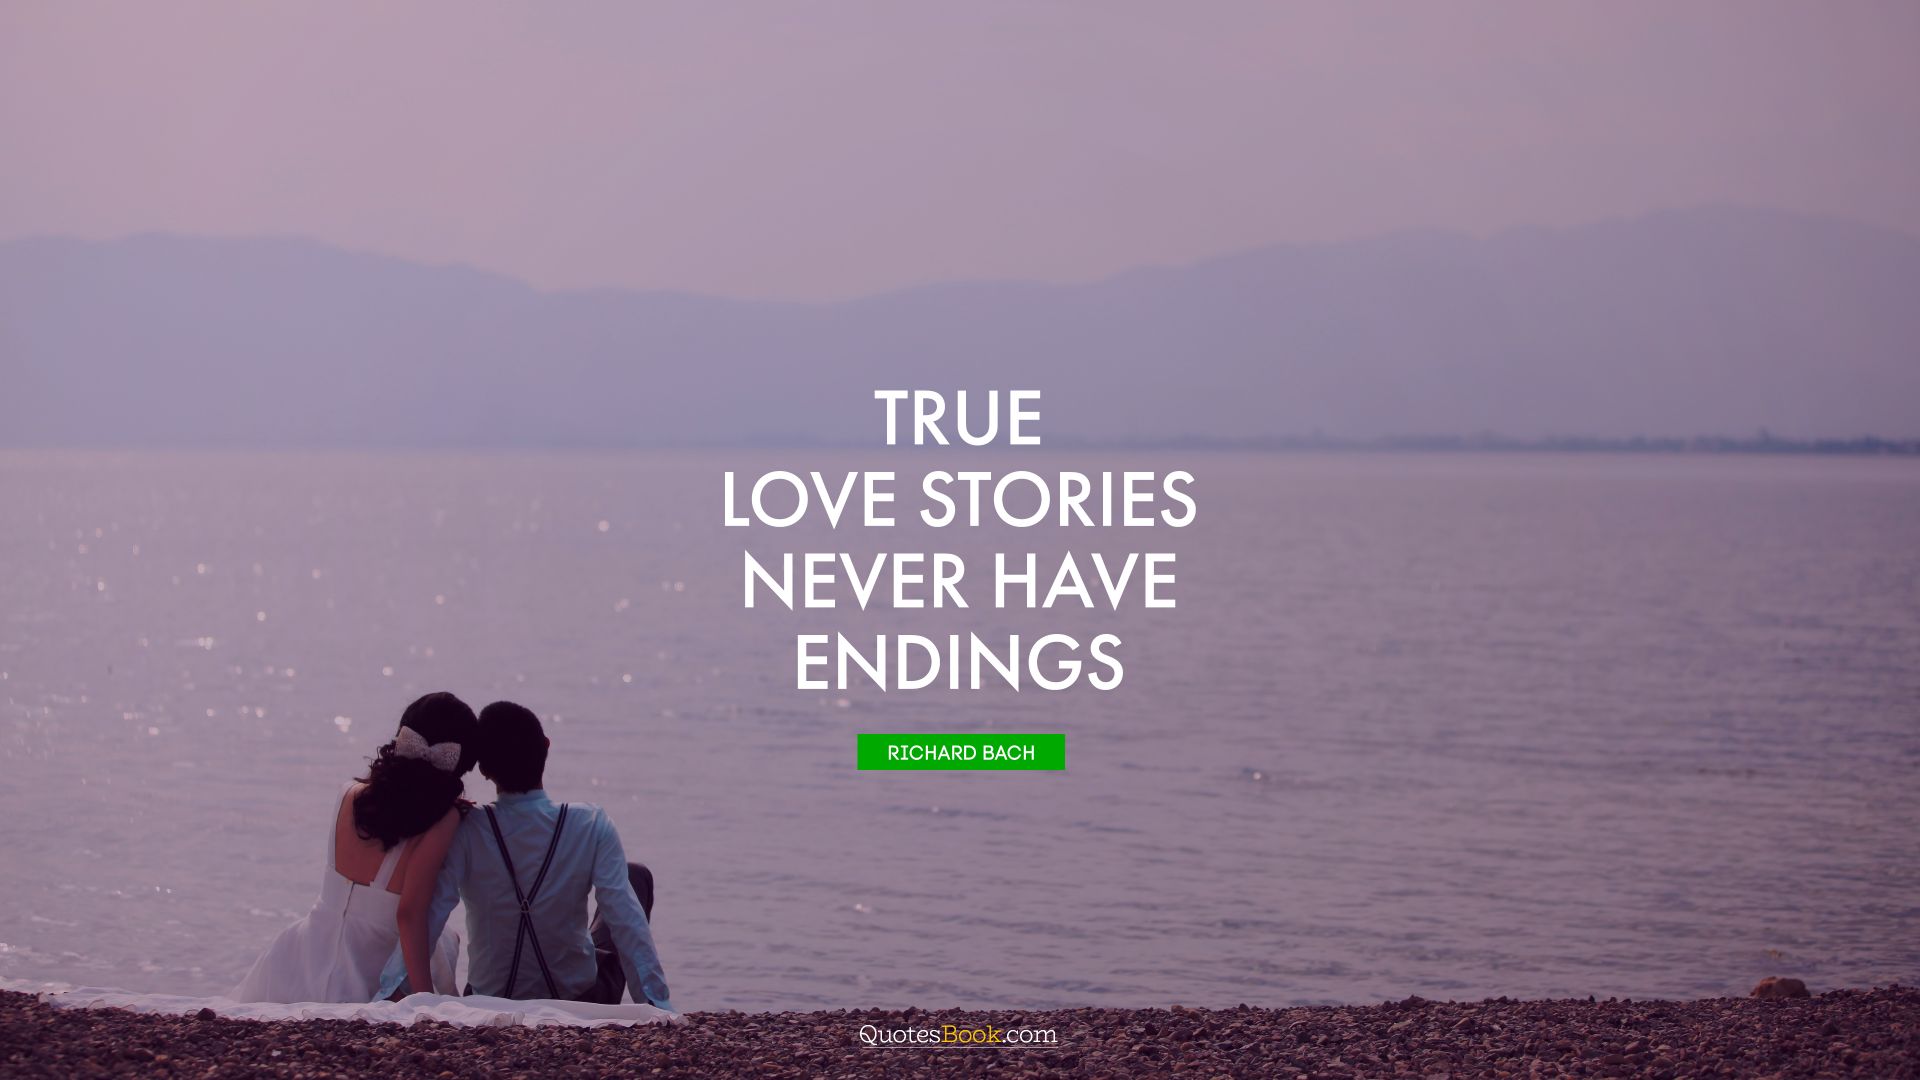 True love stories never have endings. - Quote by Richard Bach